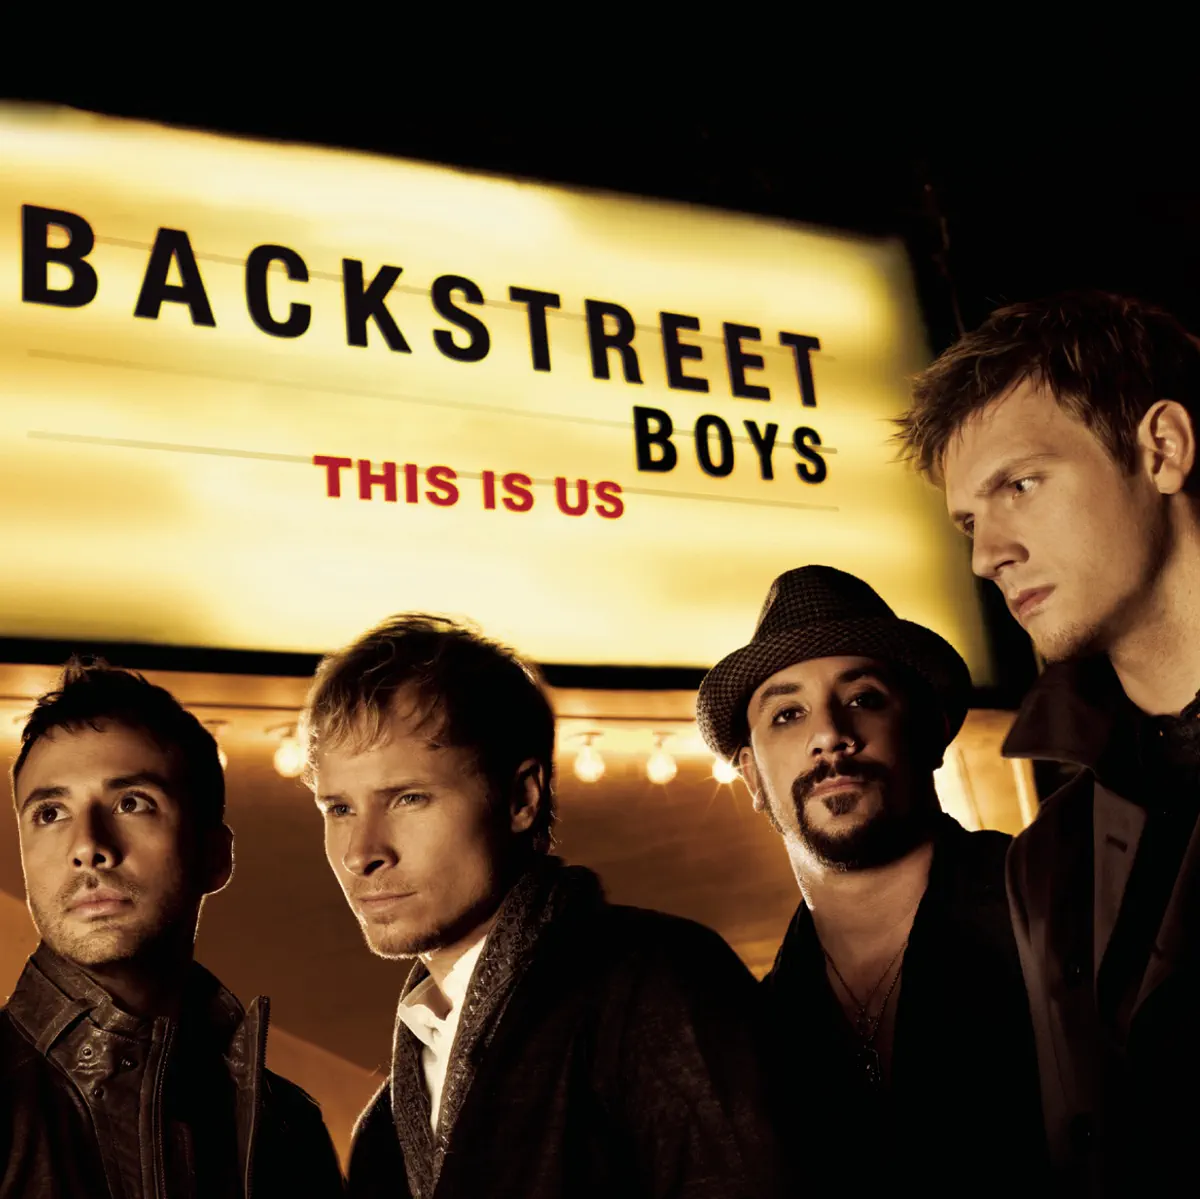 Backstreet Boys - This Is Us (Deluxe Version) (2009) [iTunes Plus AAC M4A]-新房子